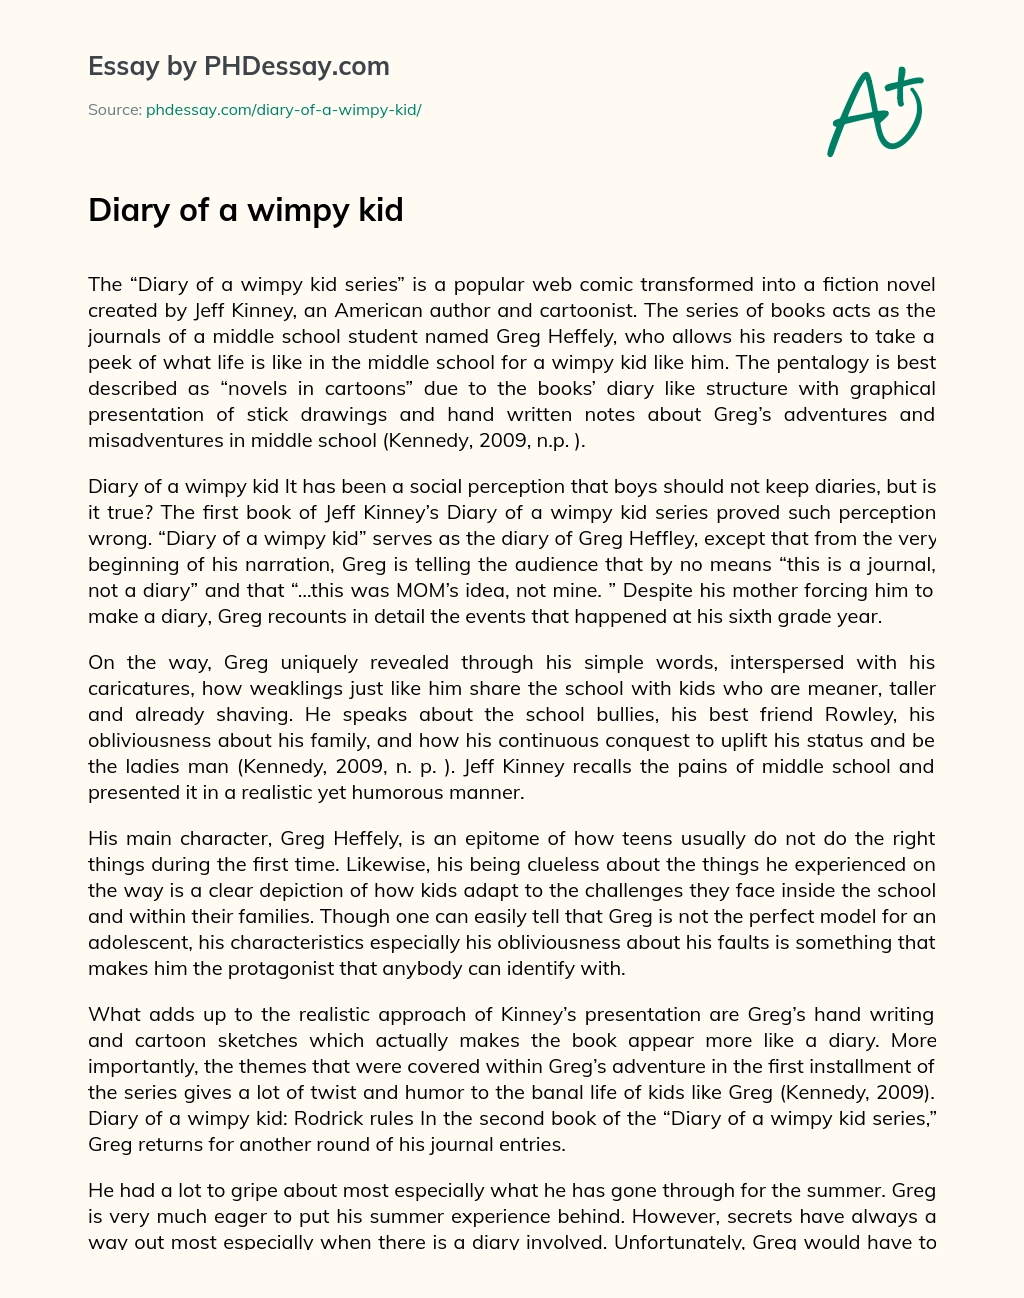 Diary of a wimpy kid essay